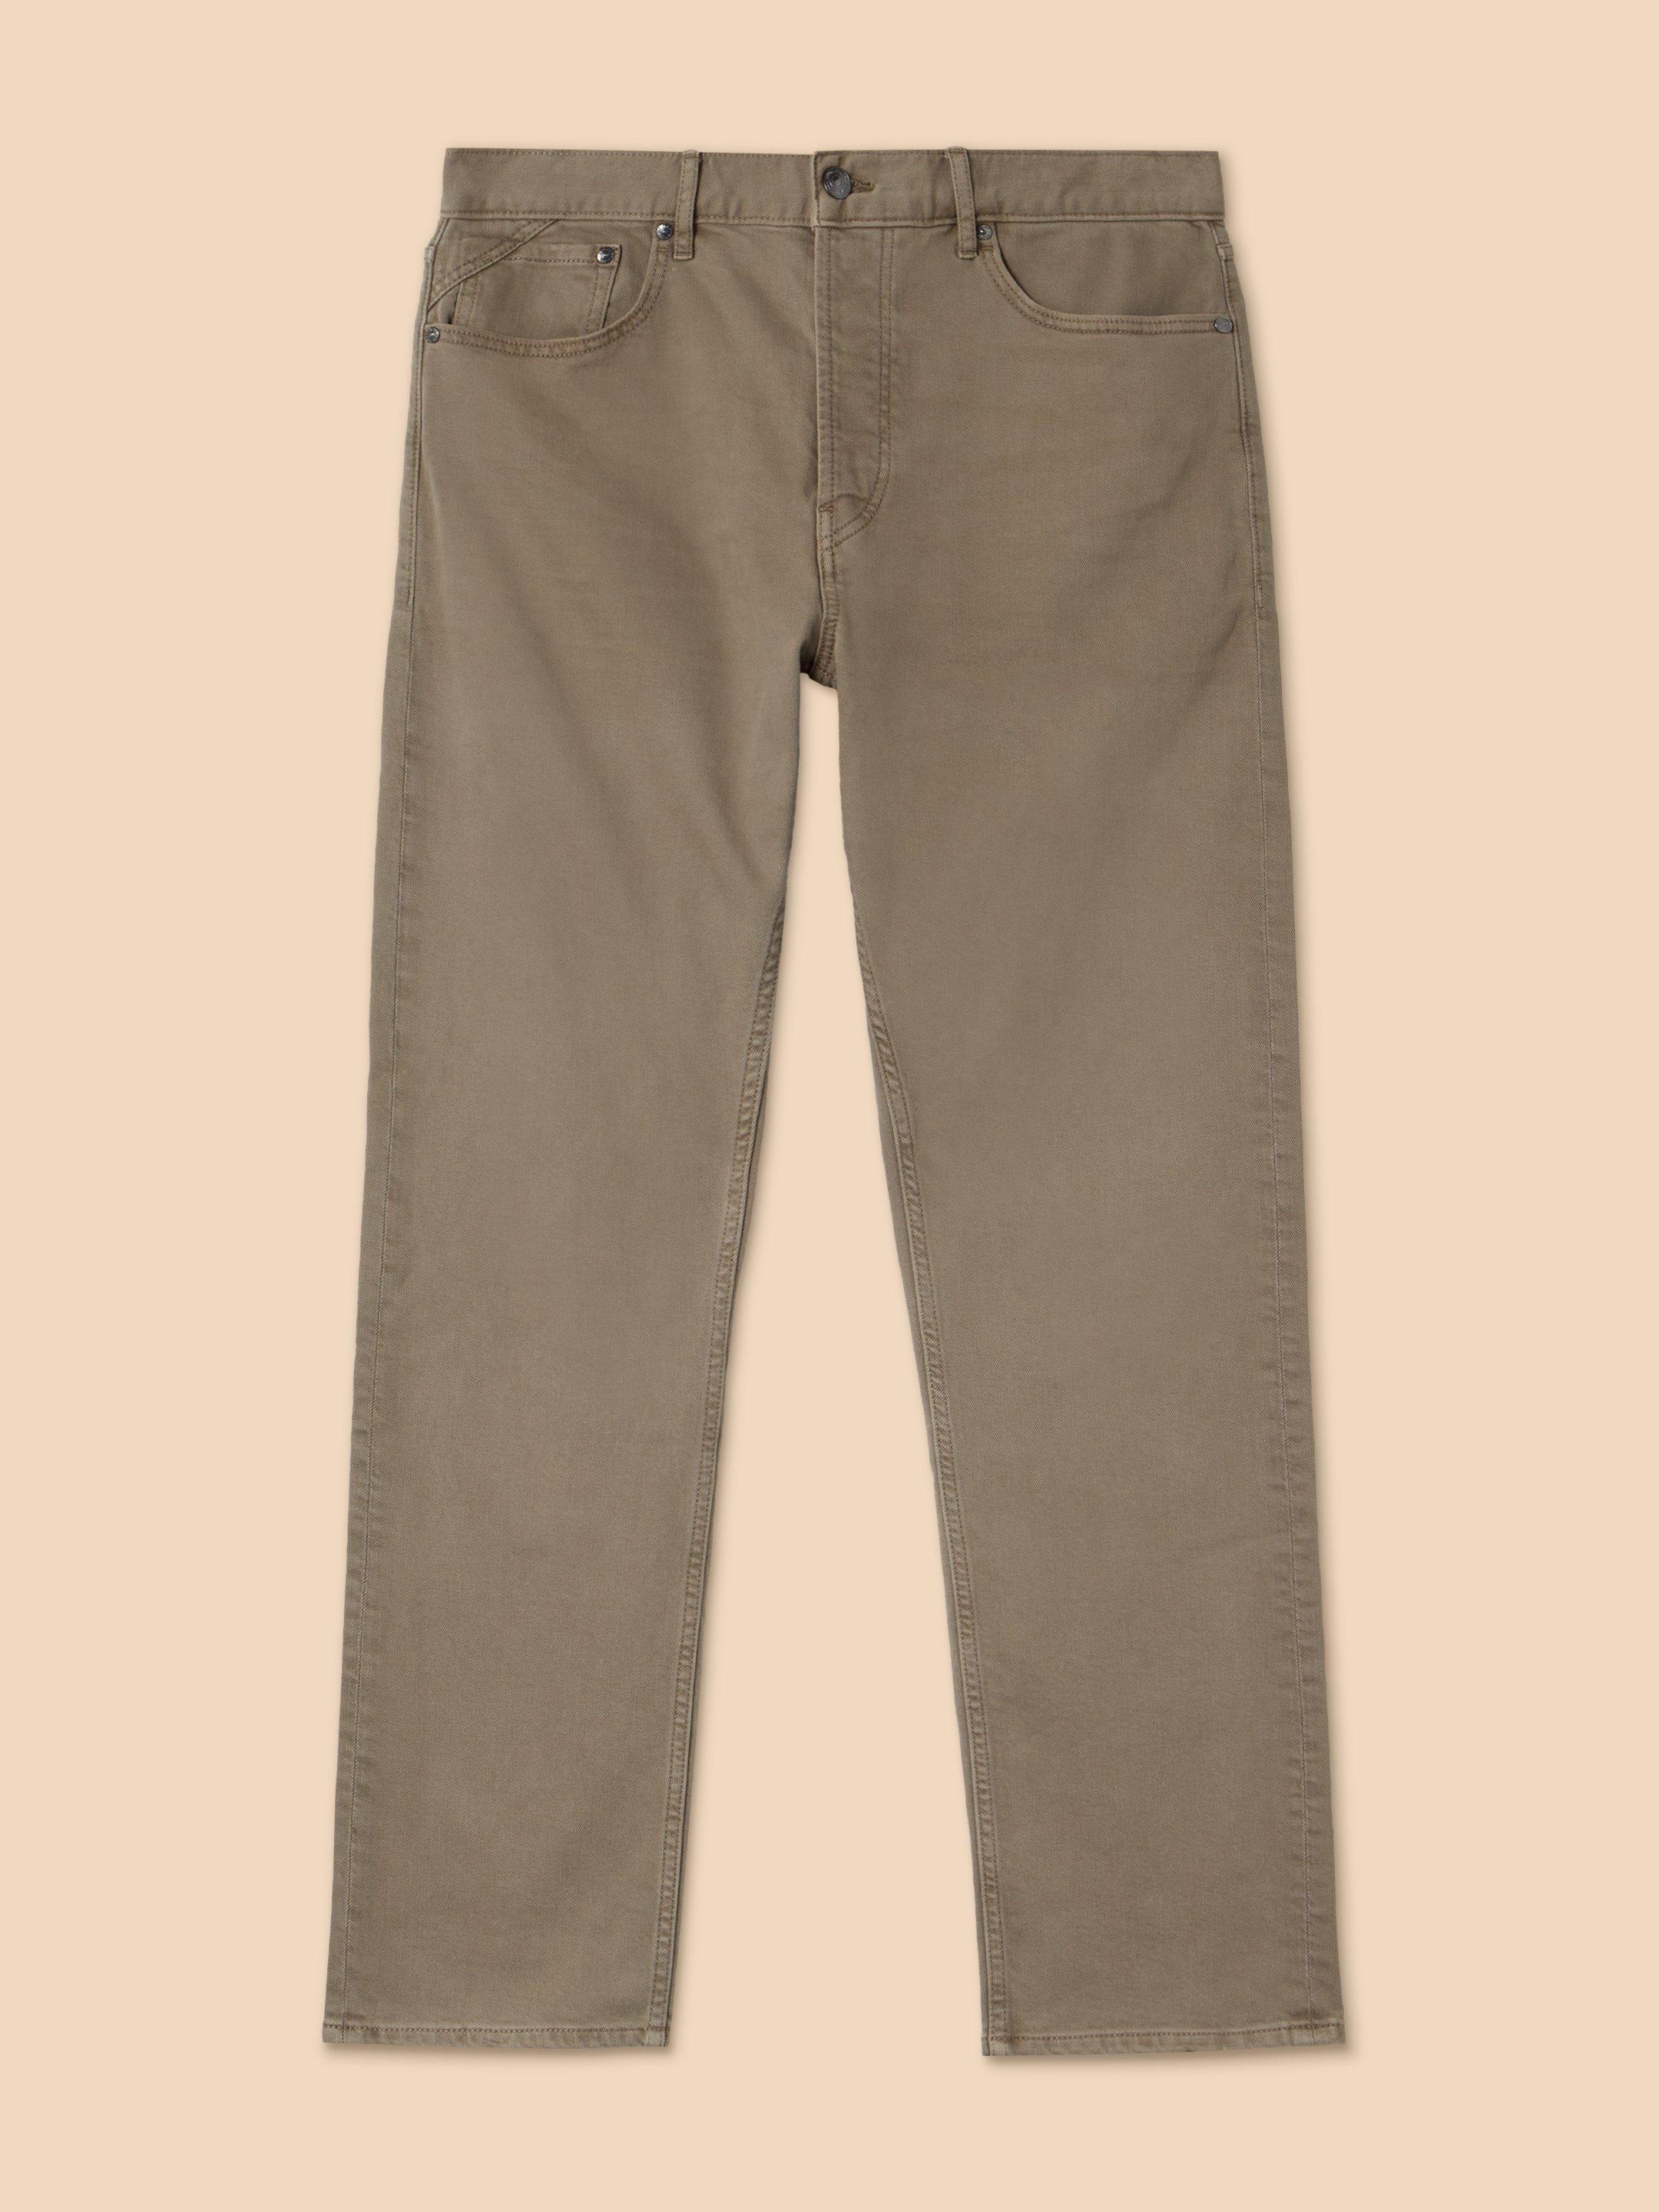 Eastwood Straight Jean in LGT NAT - FLAT FRONT